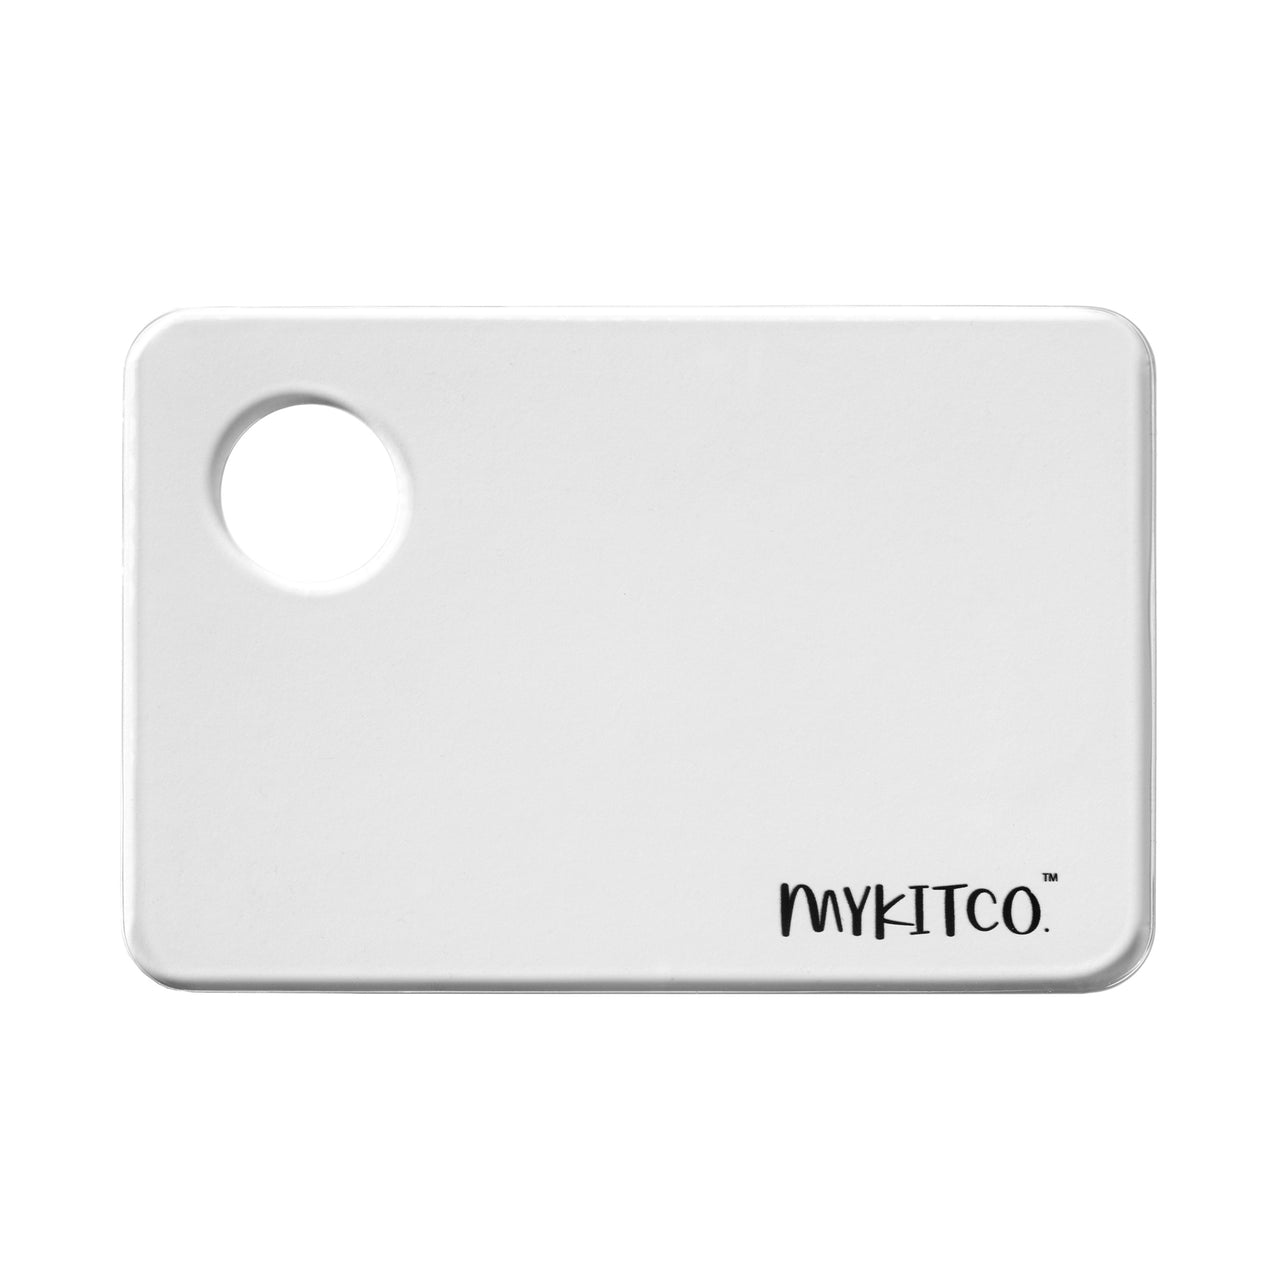 MY CLEAR PALETTE - MYKITCO.™